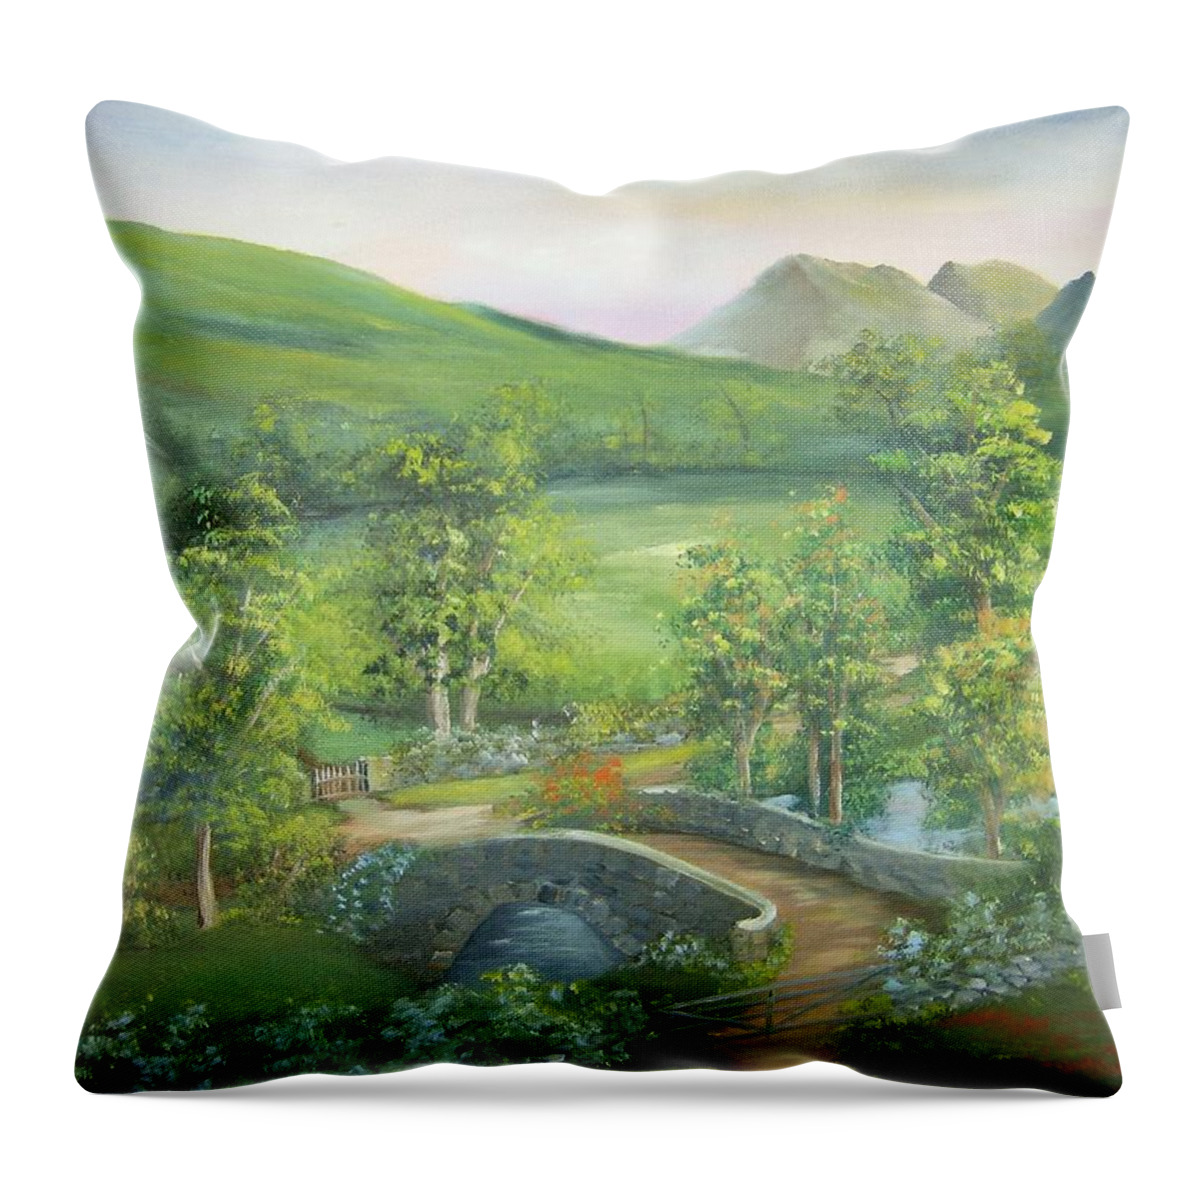 Bridge Throw Pillow featuring the painting Stonebridge River Crossing by Debra Campbell